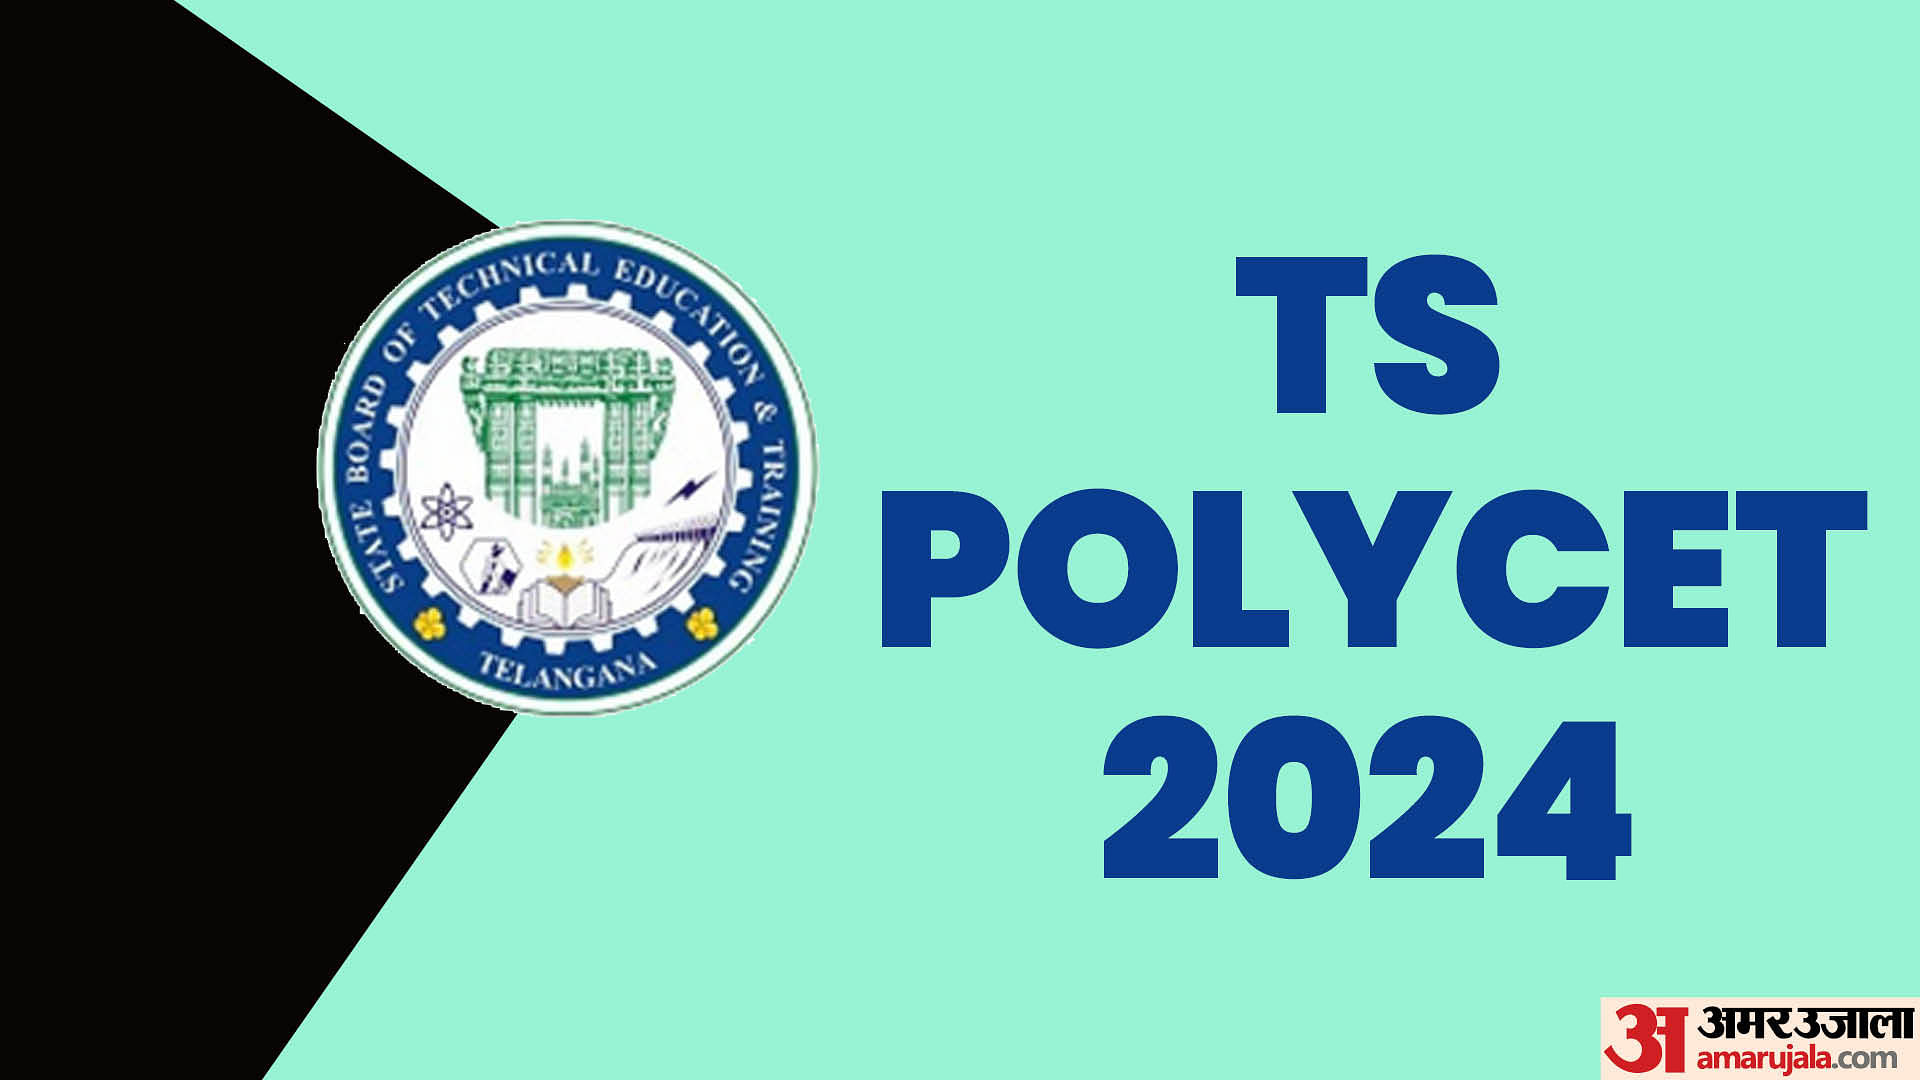 TS POLYCET 2024 Result declared, Check your rank card at polycet.sbtet.telangana.gov.in